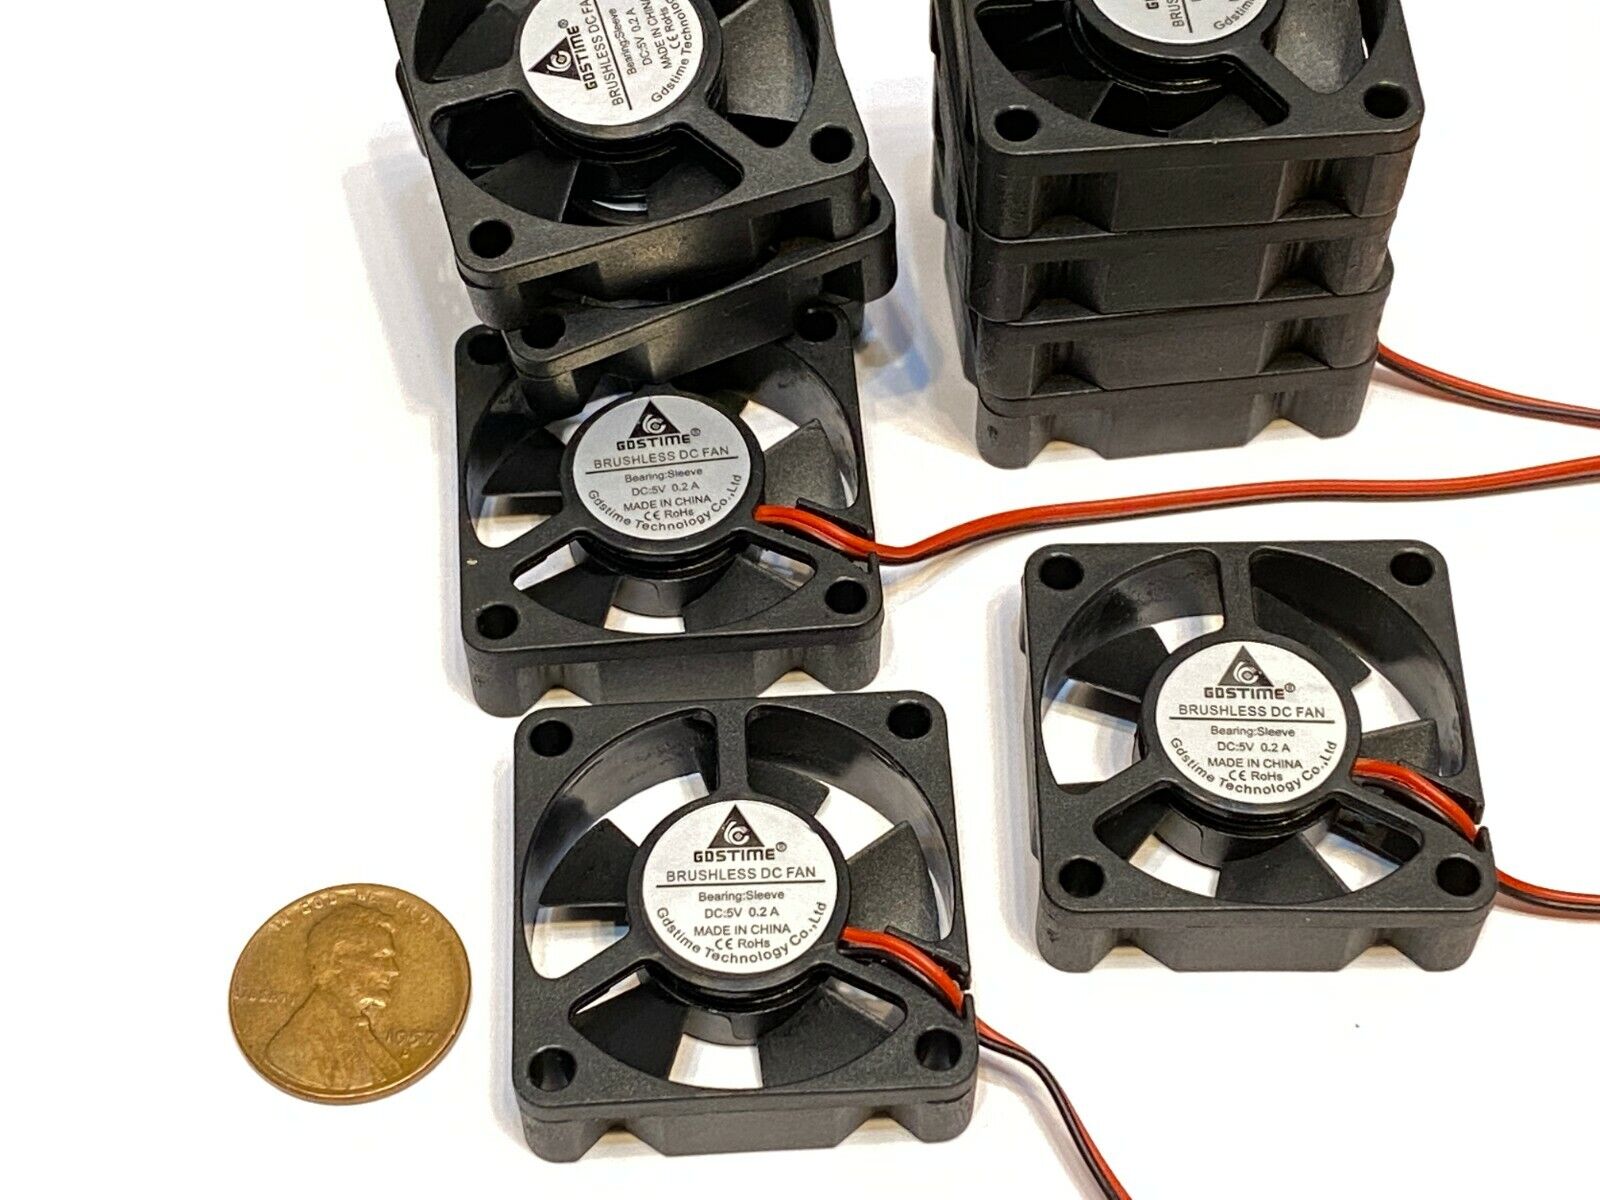 10 Pieces 5v fan 35mm x 10mm mini small cooling  2pin GDStime  3cm  C9